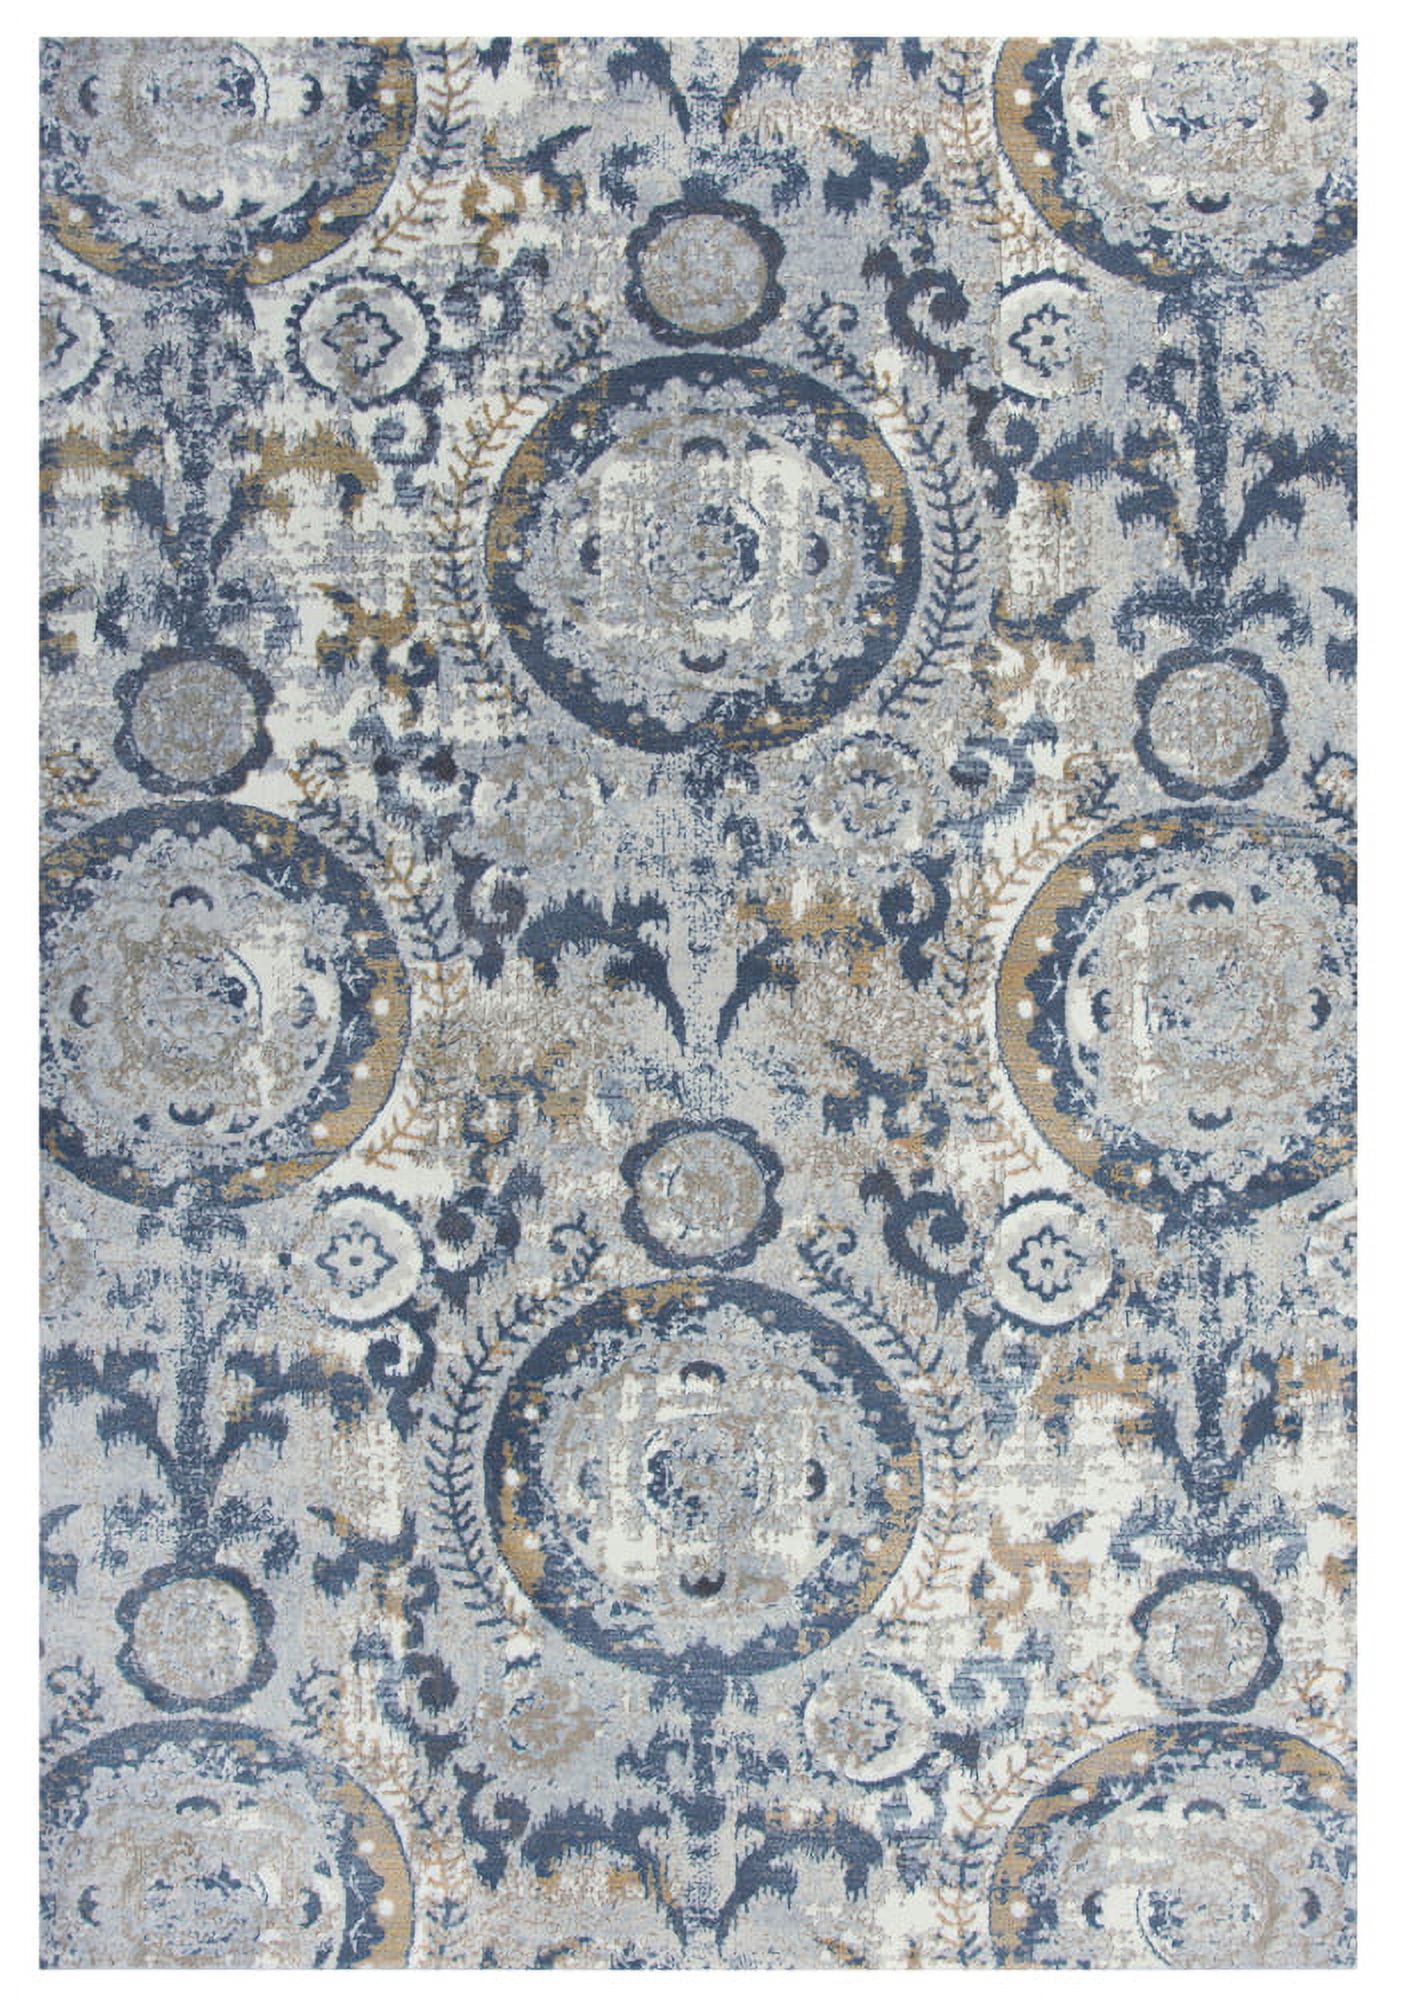 Rizzy Home Bristol Medallion Contemporary Area Rug, Gray - image 1 of 2